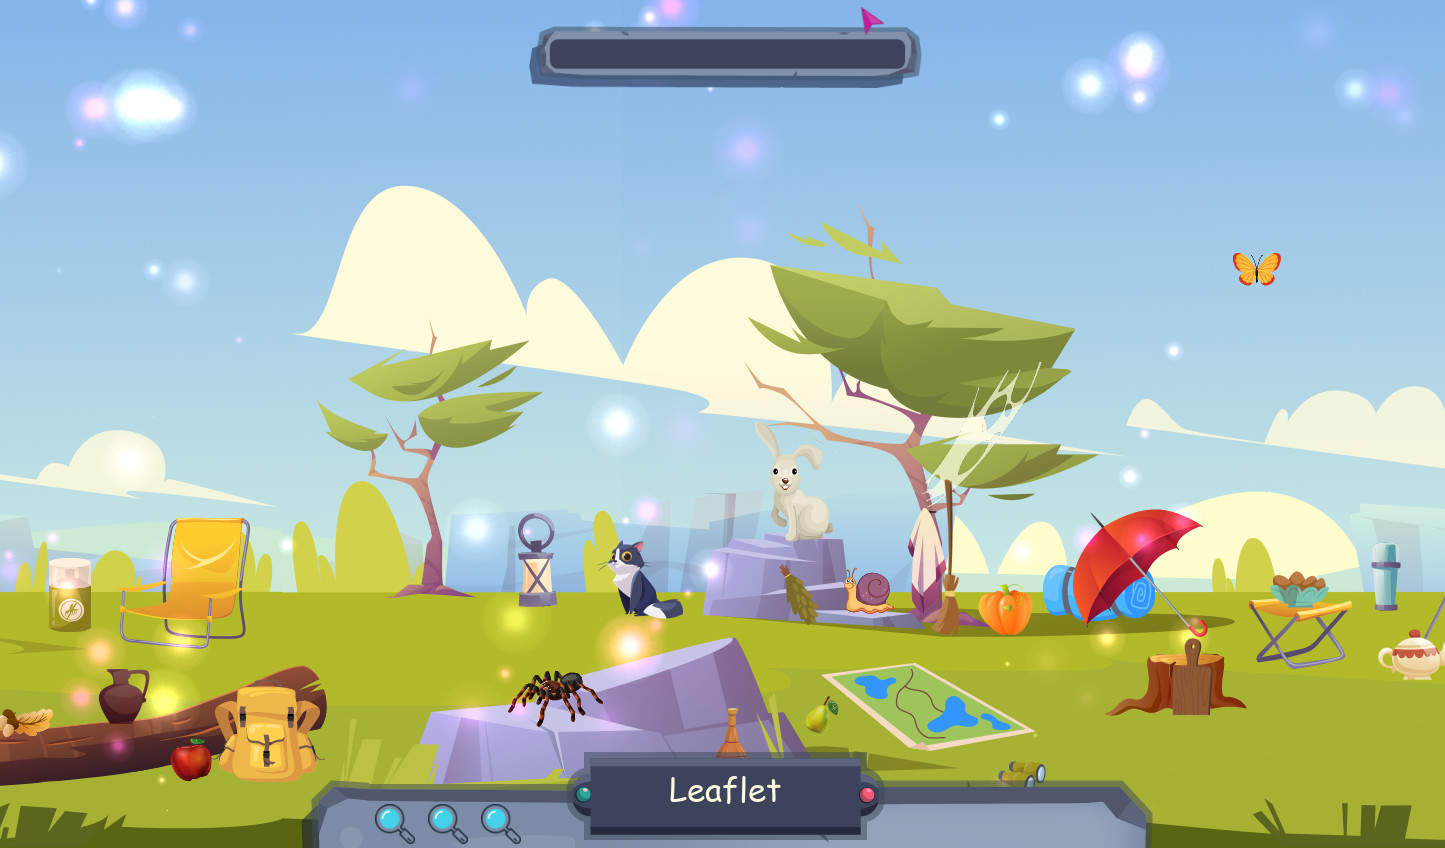 Searching for objects in the forest Free Download